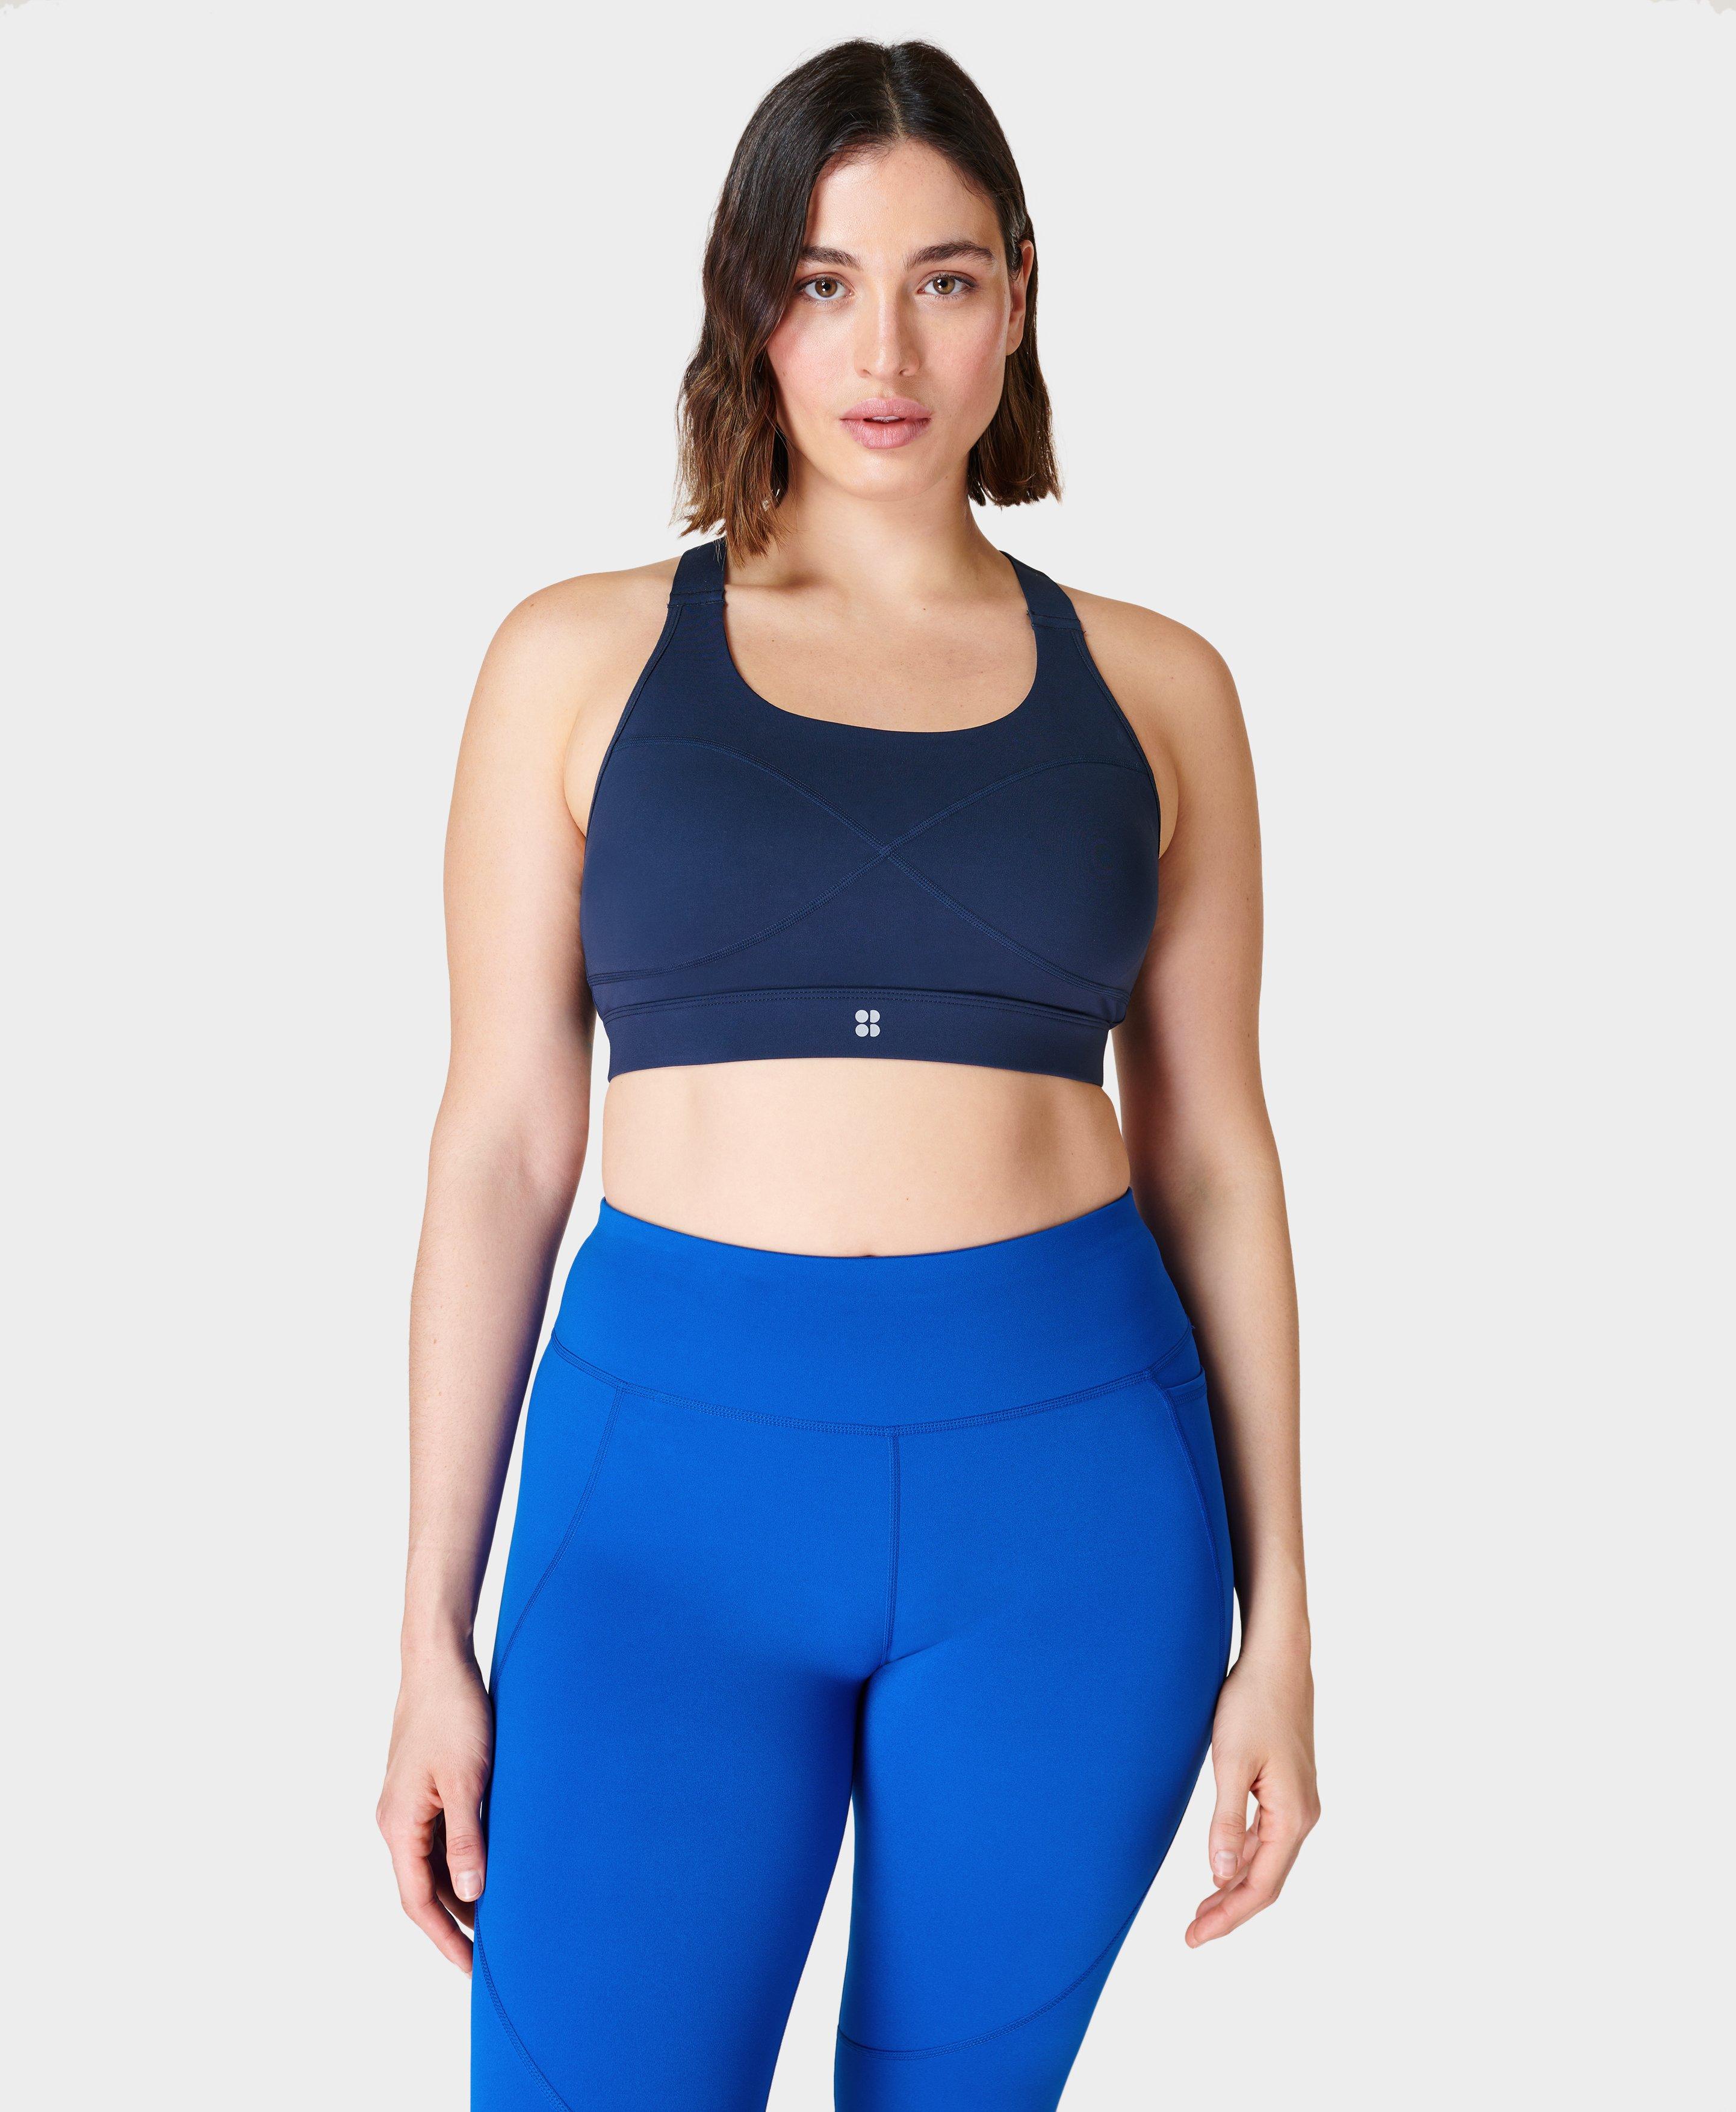 Make a Wish Exclusive Sports Bra for Women freeshipping - Catch My Drift  India